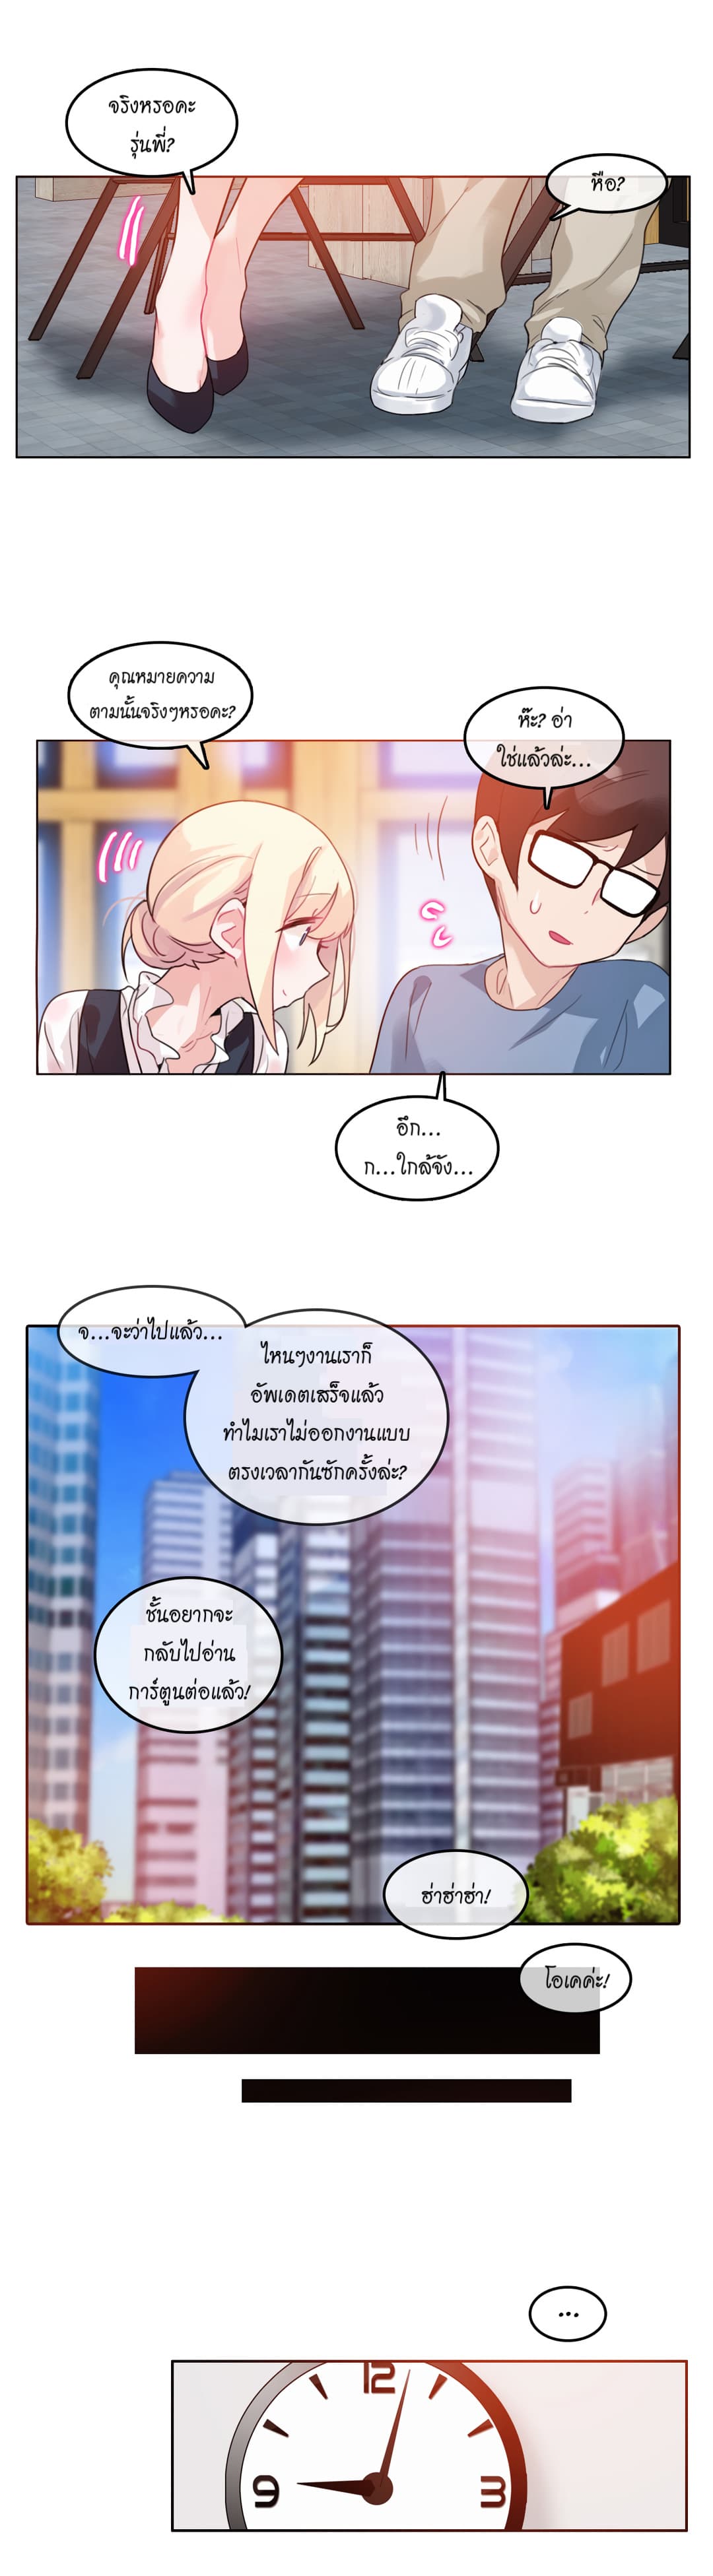 A Pervert’s Daily Life 23 (8)